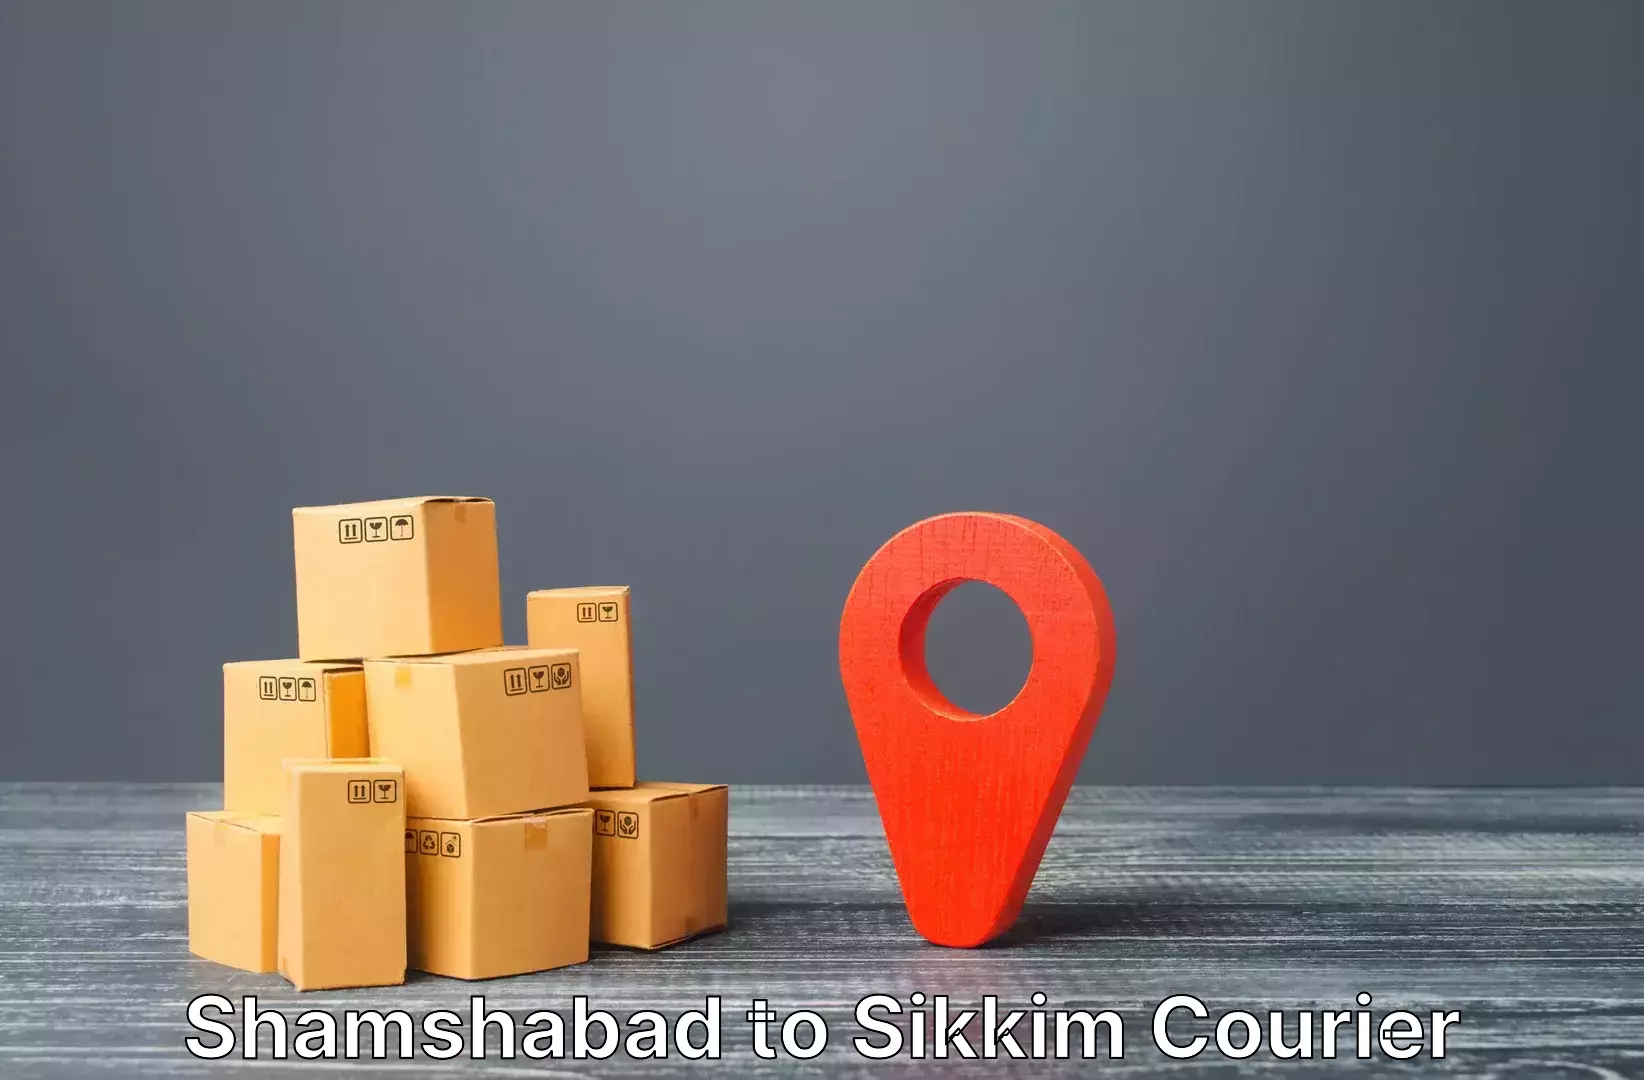 Baggage relocation service Shamshabad to North Sikkim